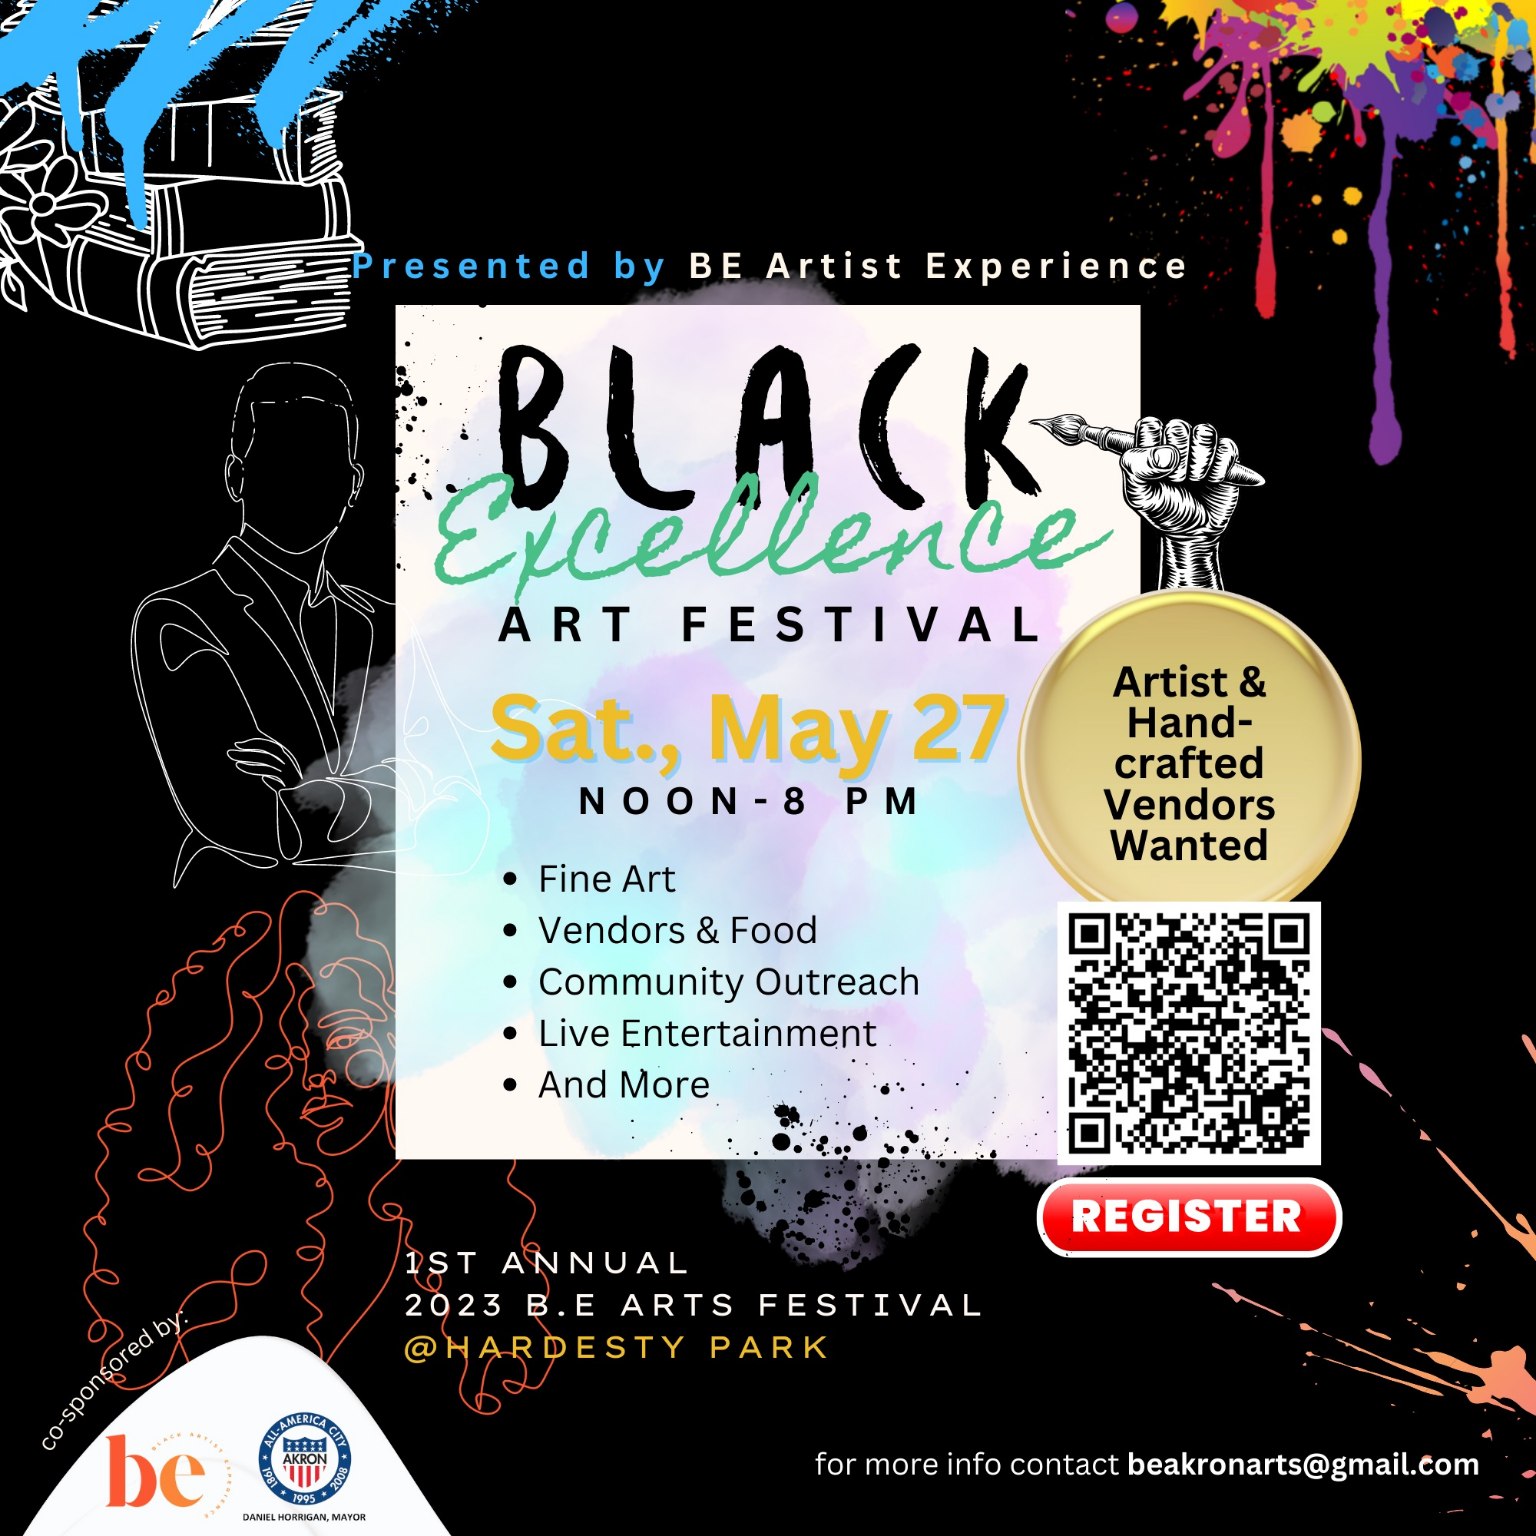 1st Annual B E Arts Festival, BE Arts Collective at City of Akron